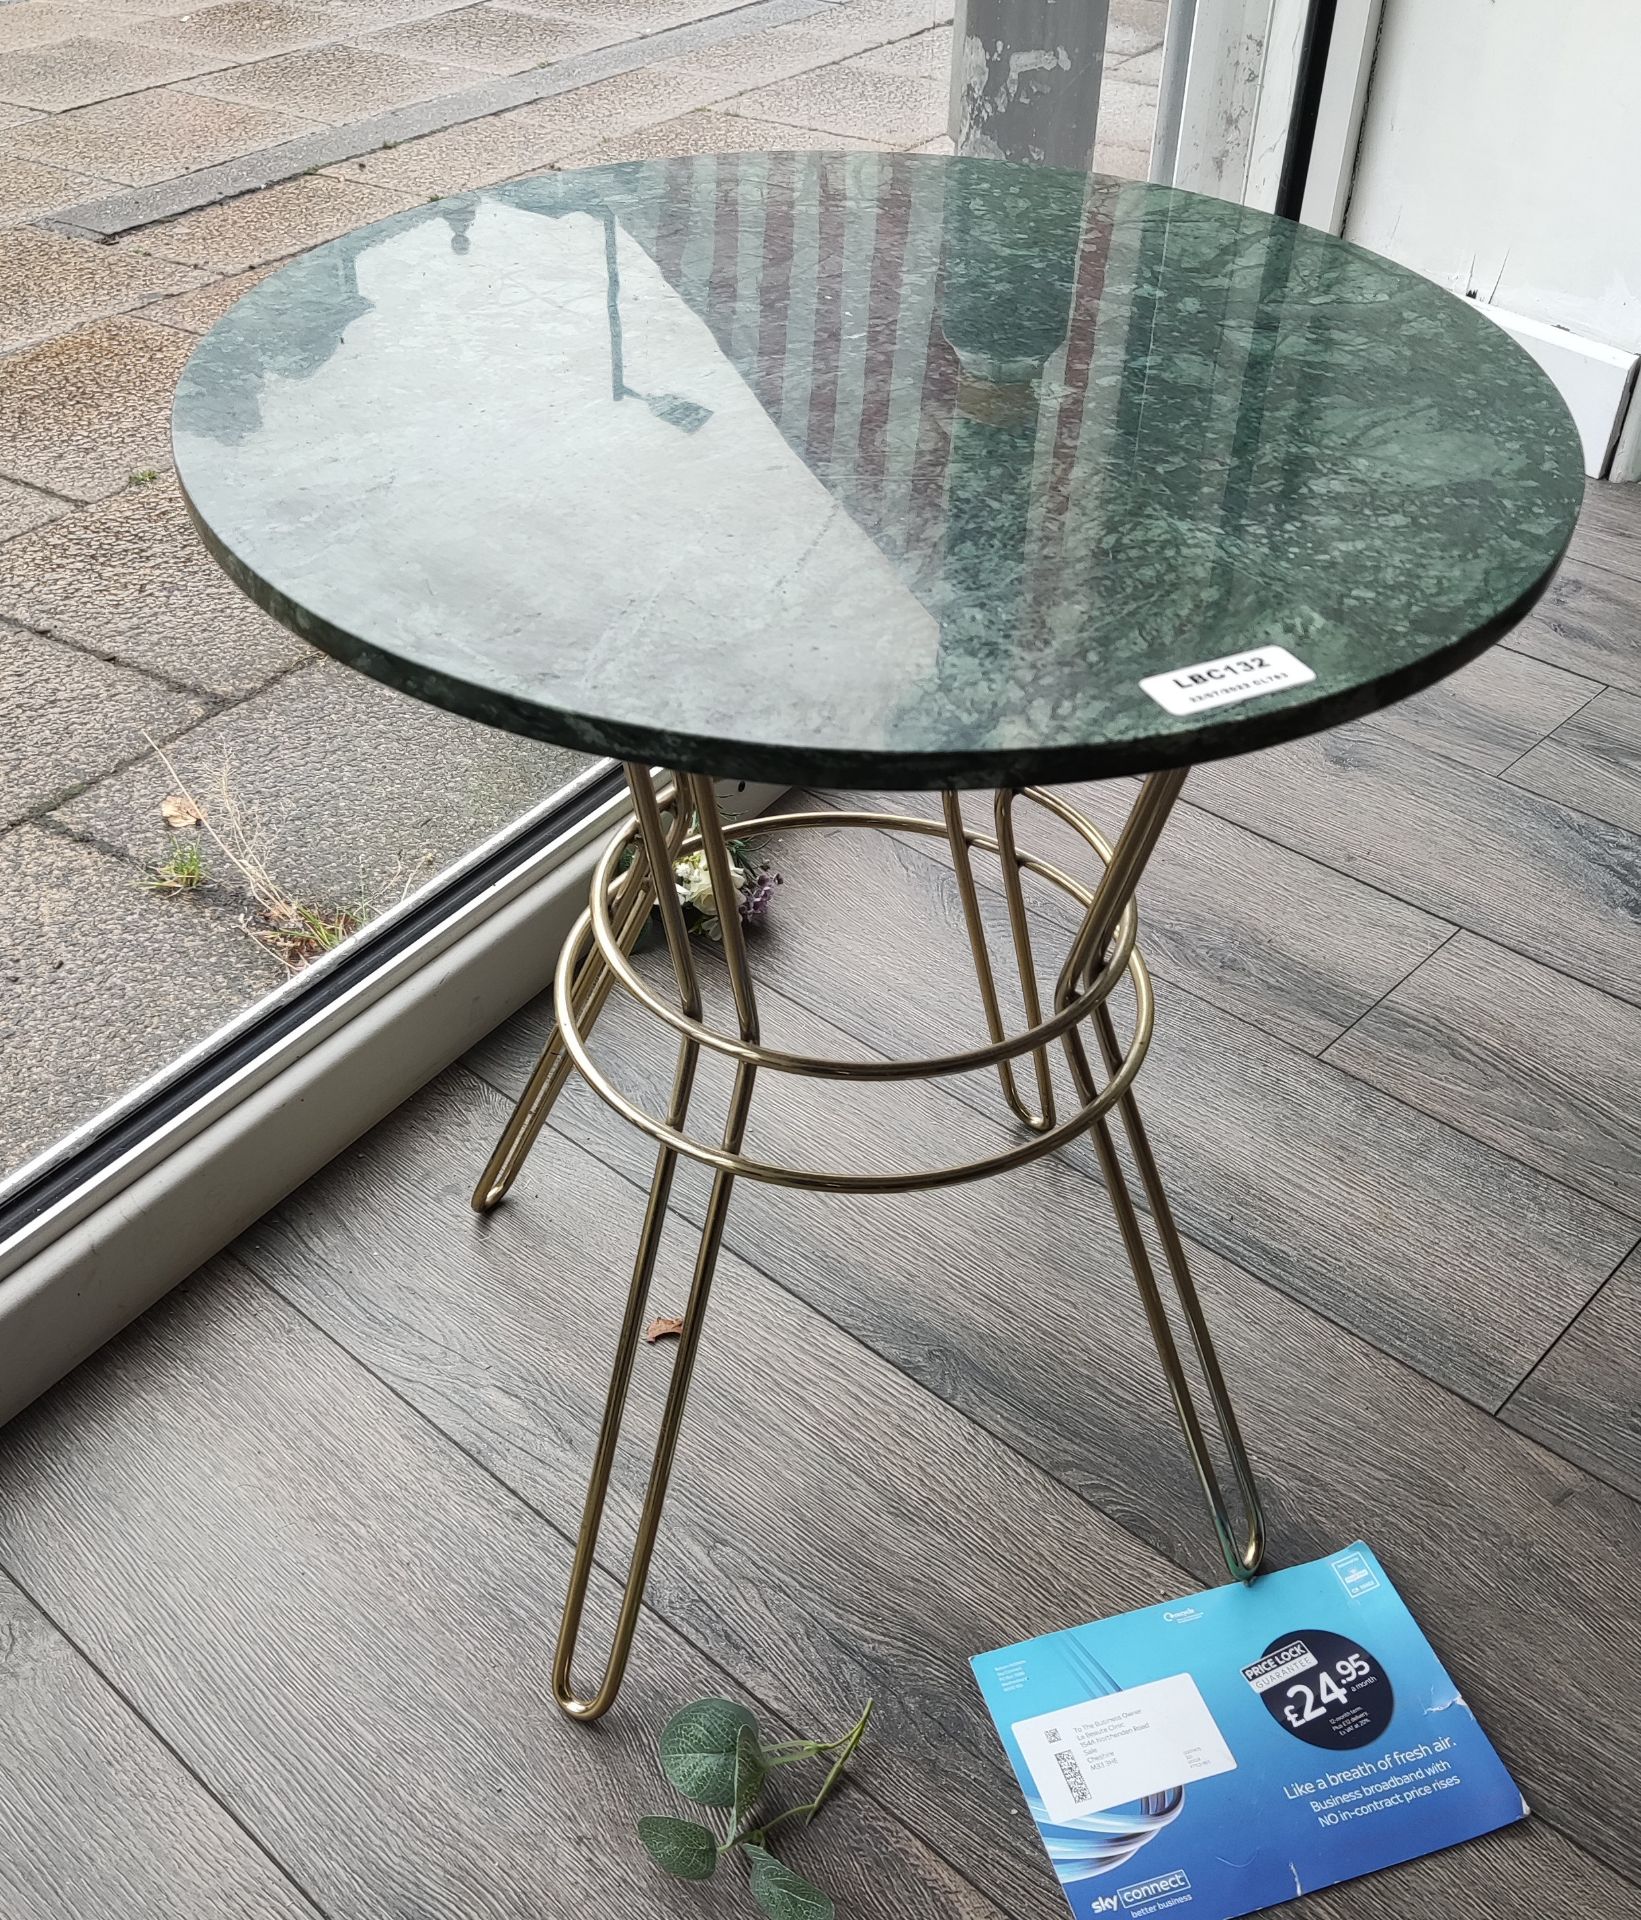 1 x Circular Coffee Table With Green Marble Top - LBC132 - CL763- Location: Sale M33Dimensio